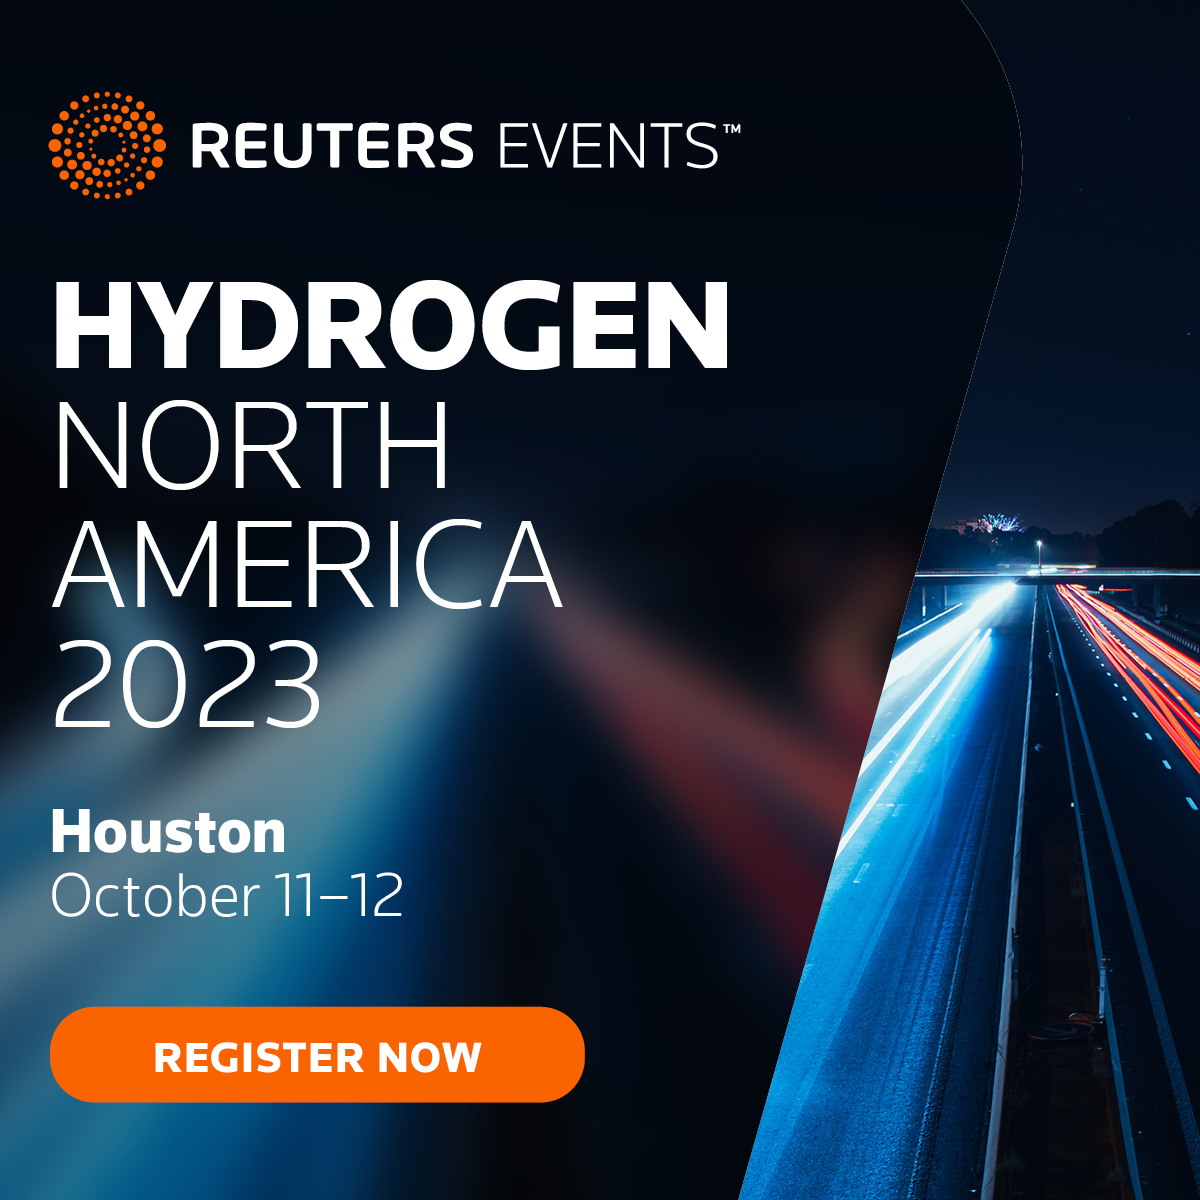 Reuters Events: Hydrogen North America 2023 organized by James Power